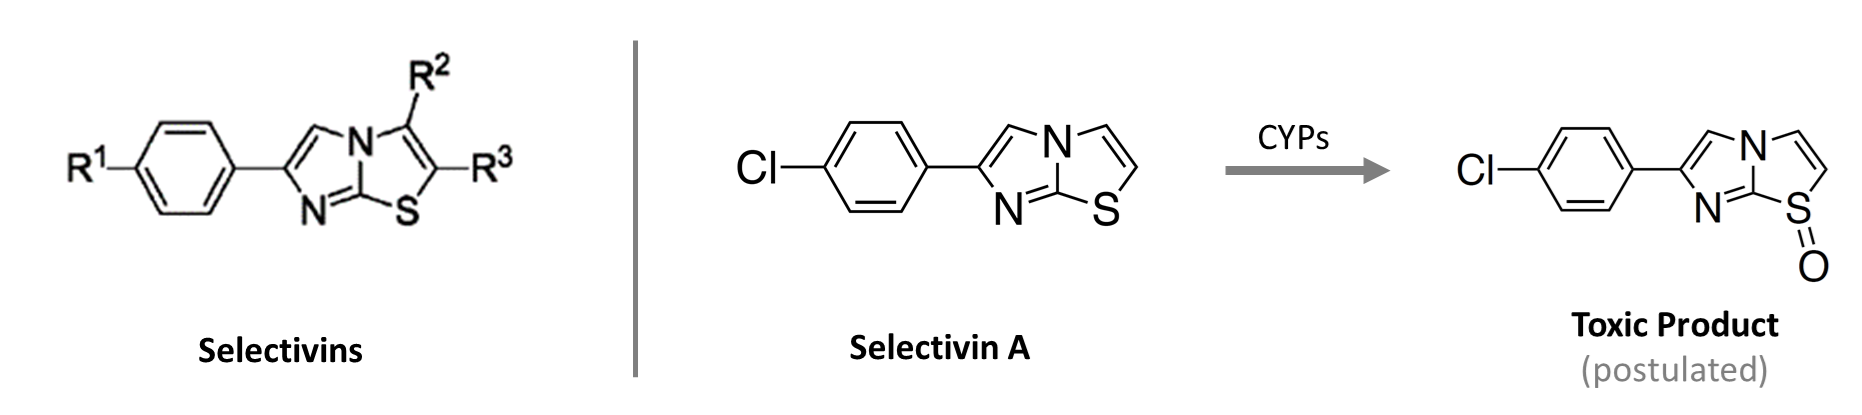 general structure of the selectivins